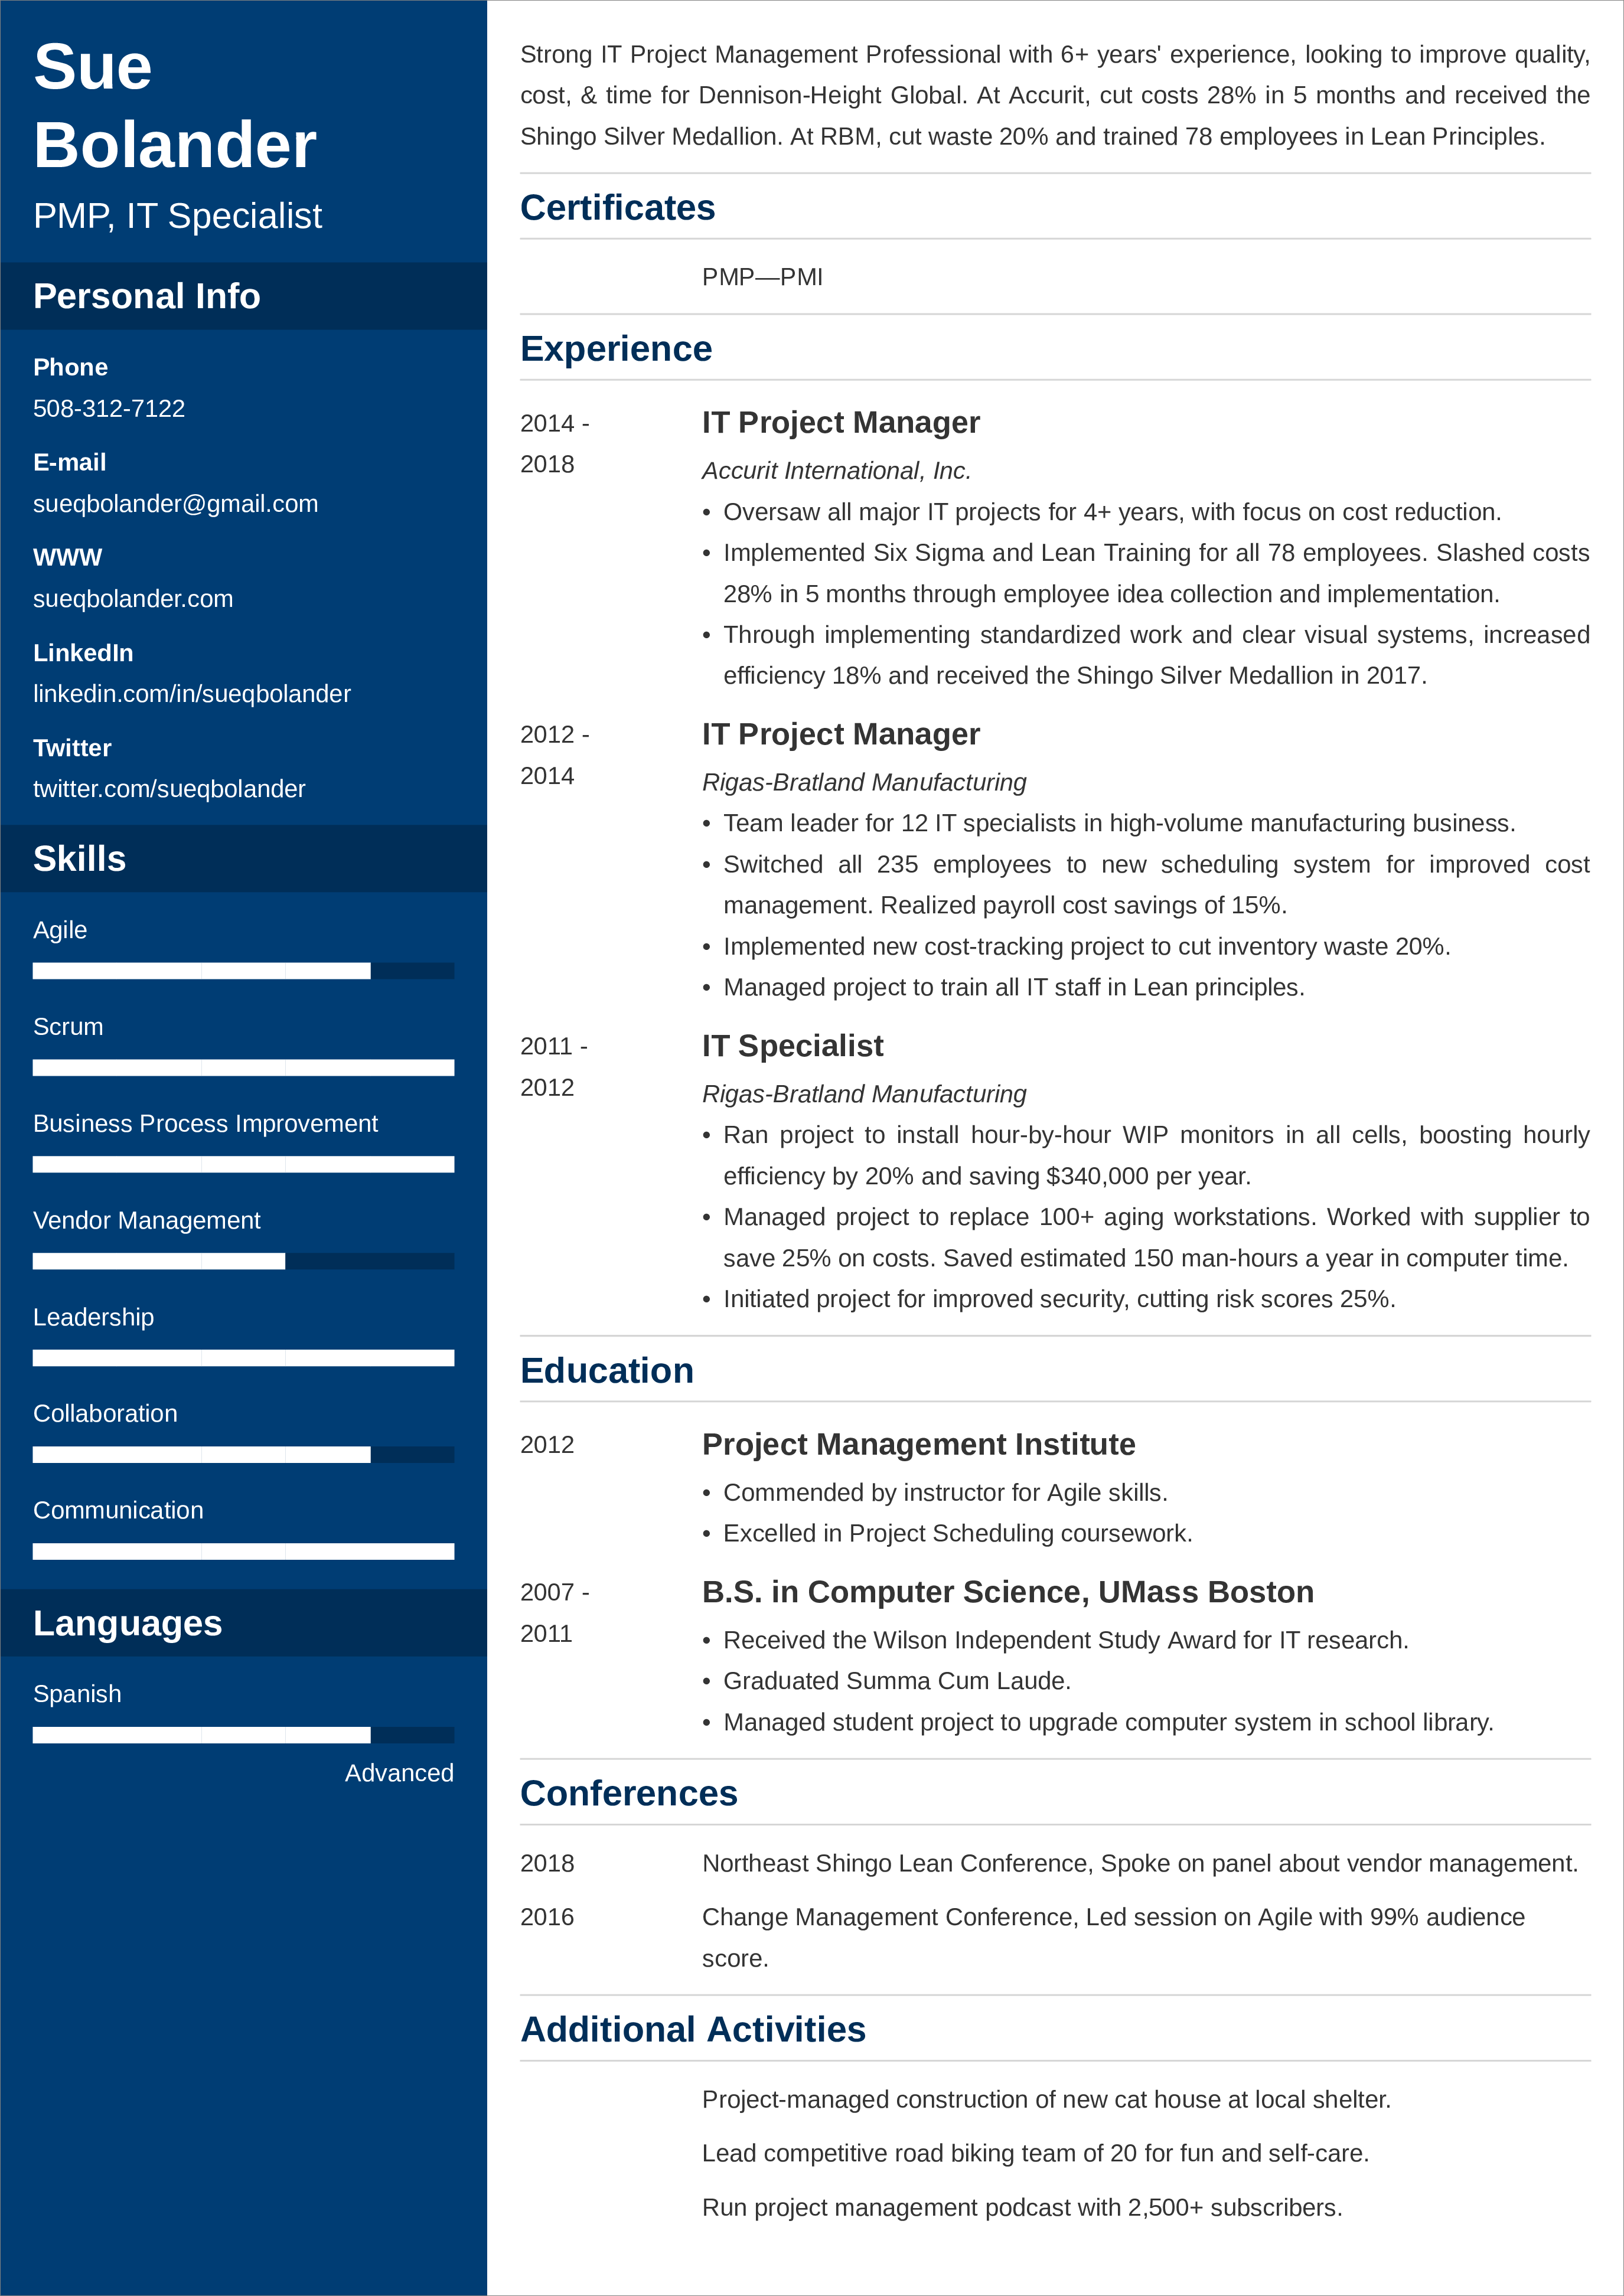 resume template for project manager